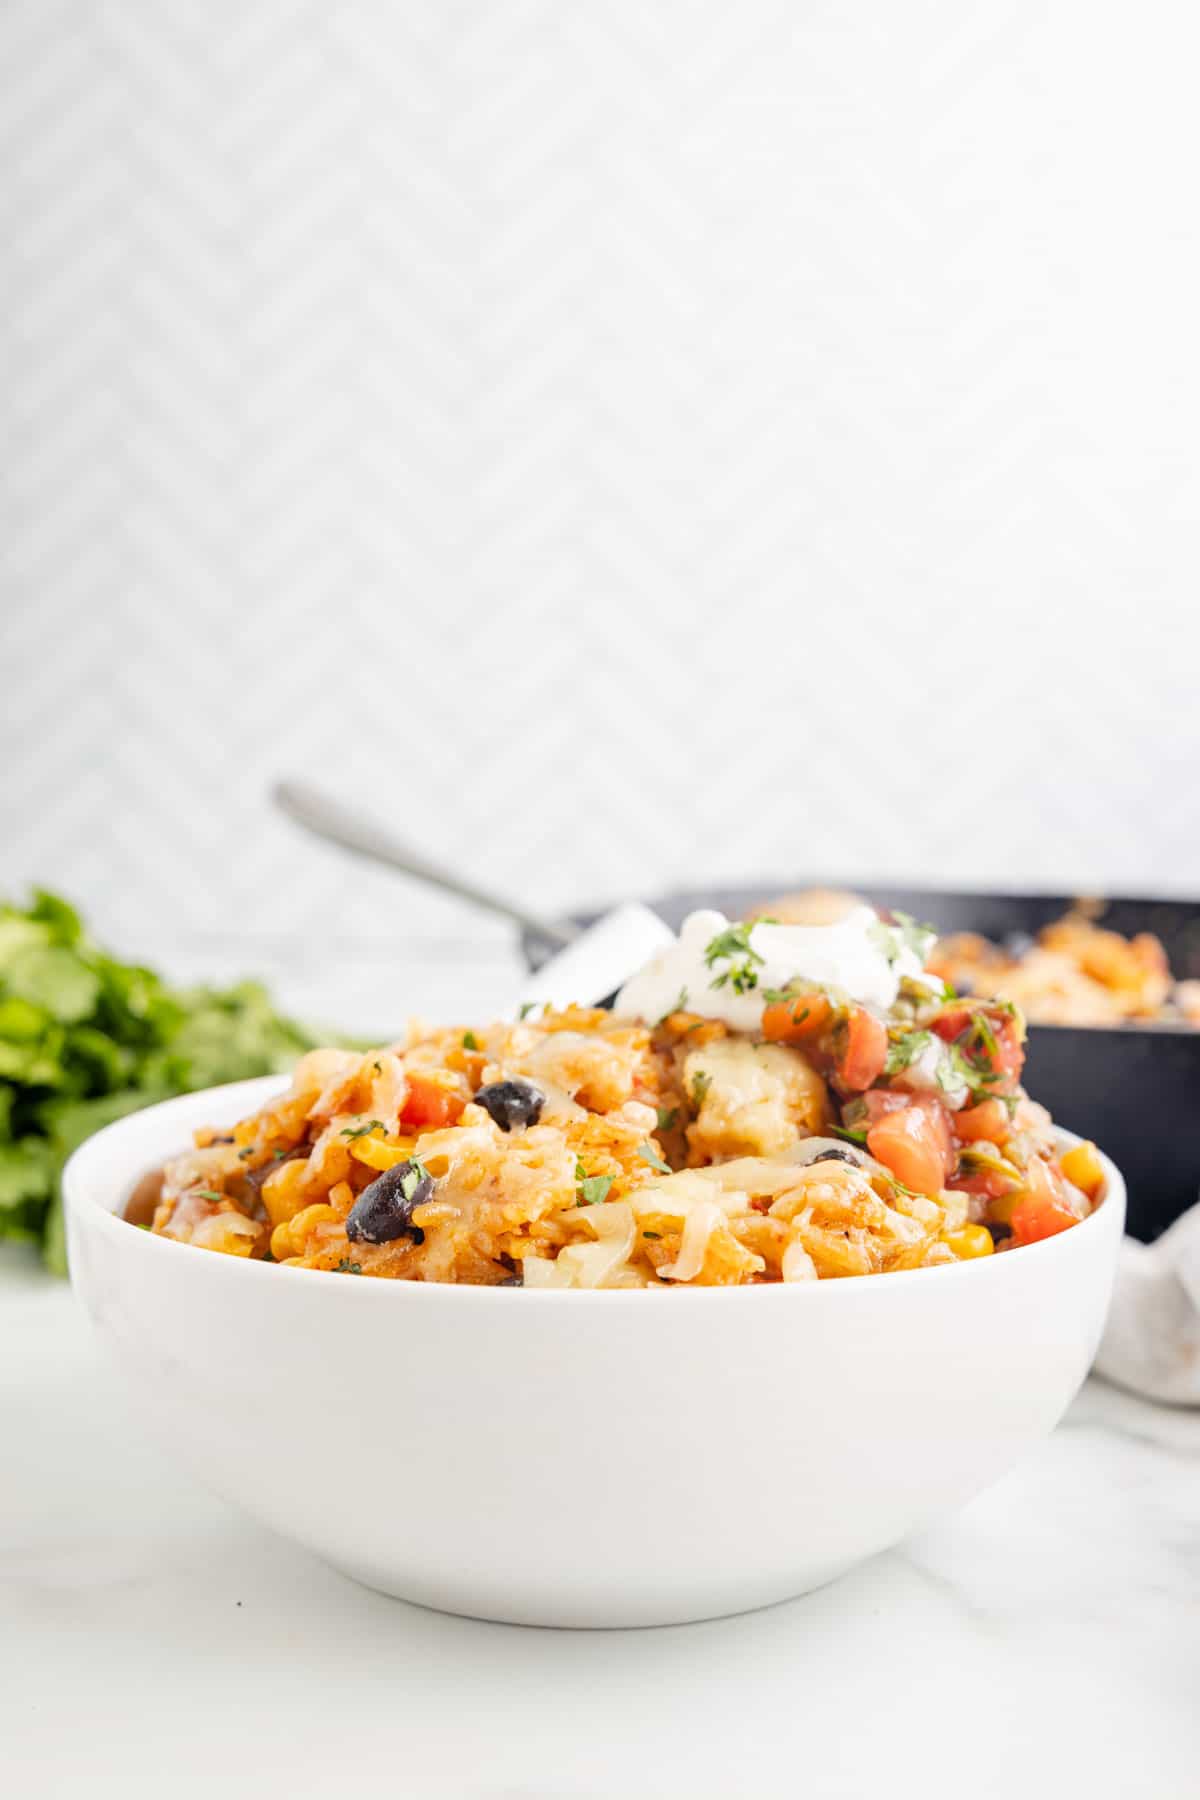 One Pan Cheesy Taco Chicken and Rice is an easy stove top dinner recipe loaded with chicken thigh chunks, Rotel, corn, black beans, taco seasoning, rice and shredded cheese.